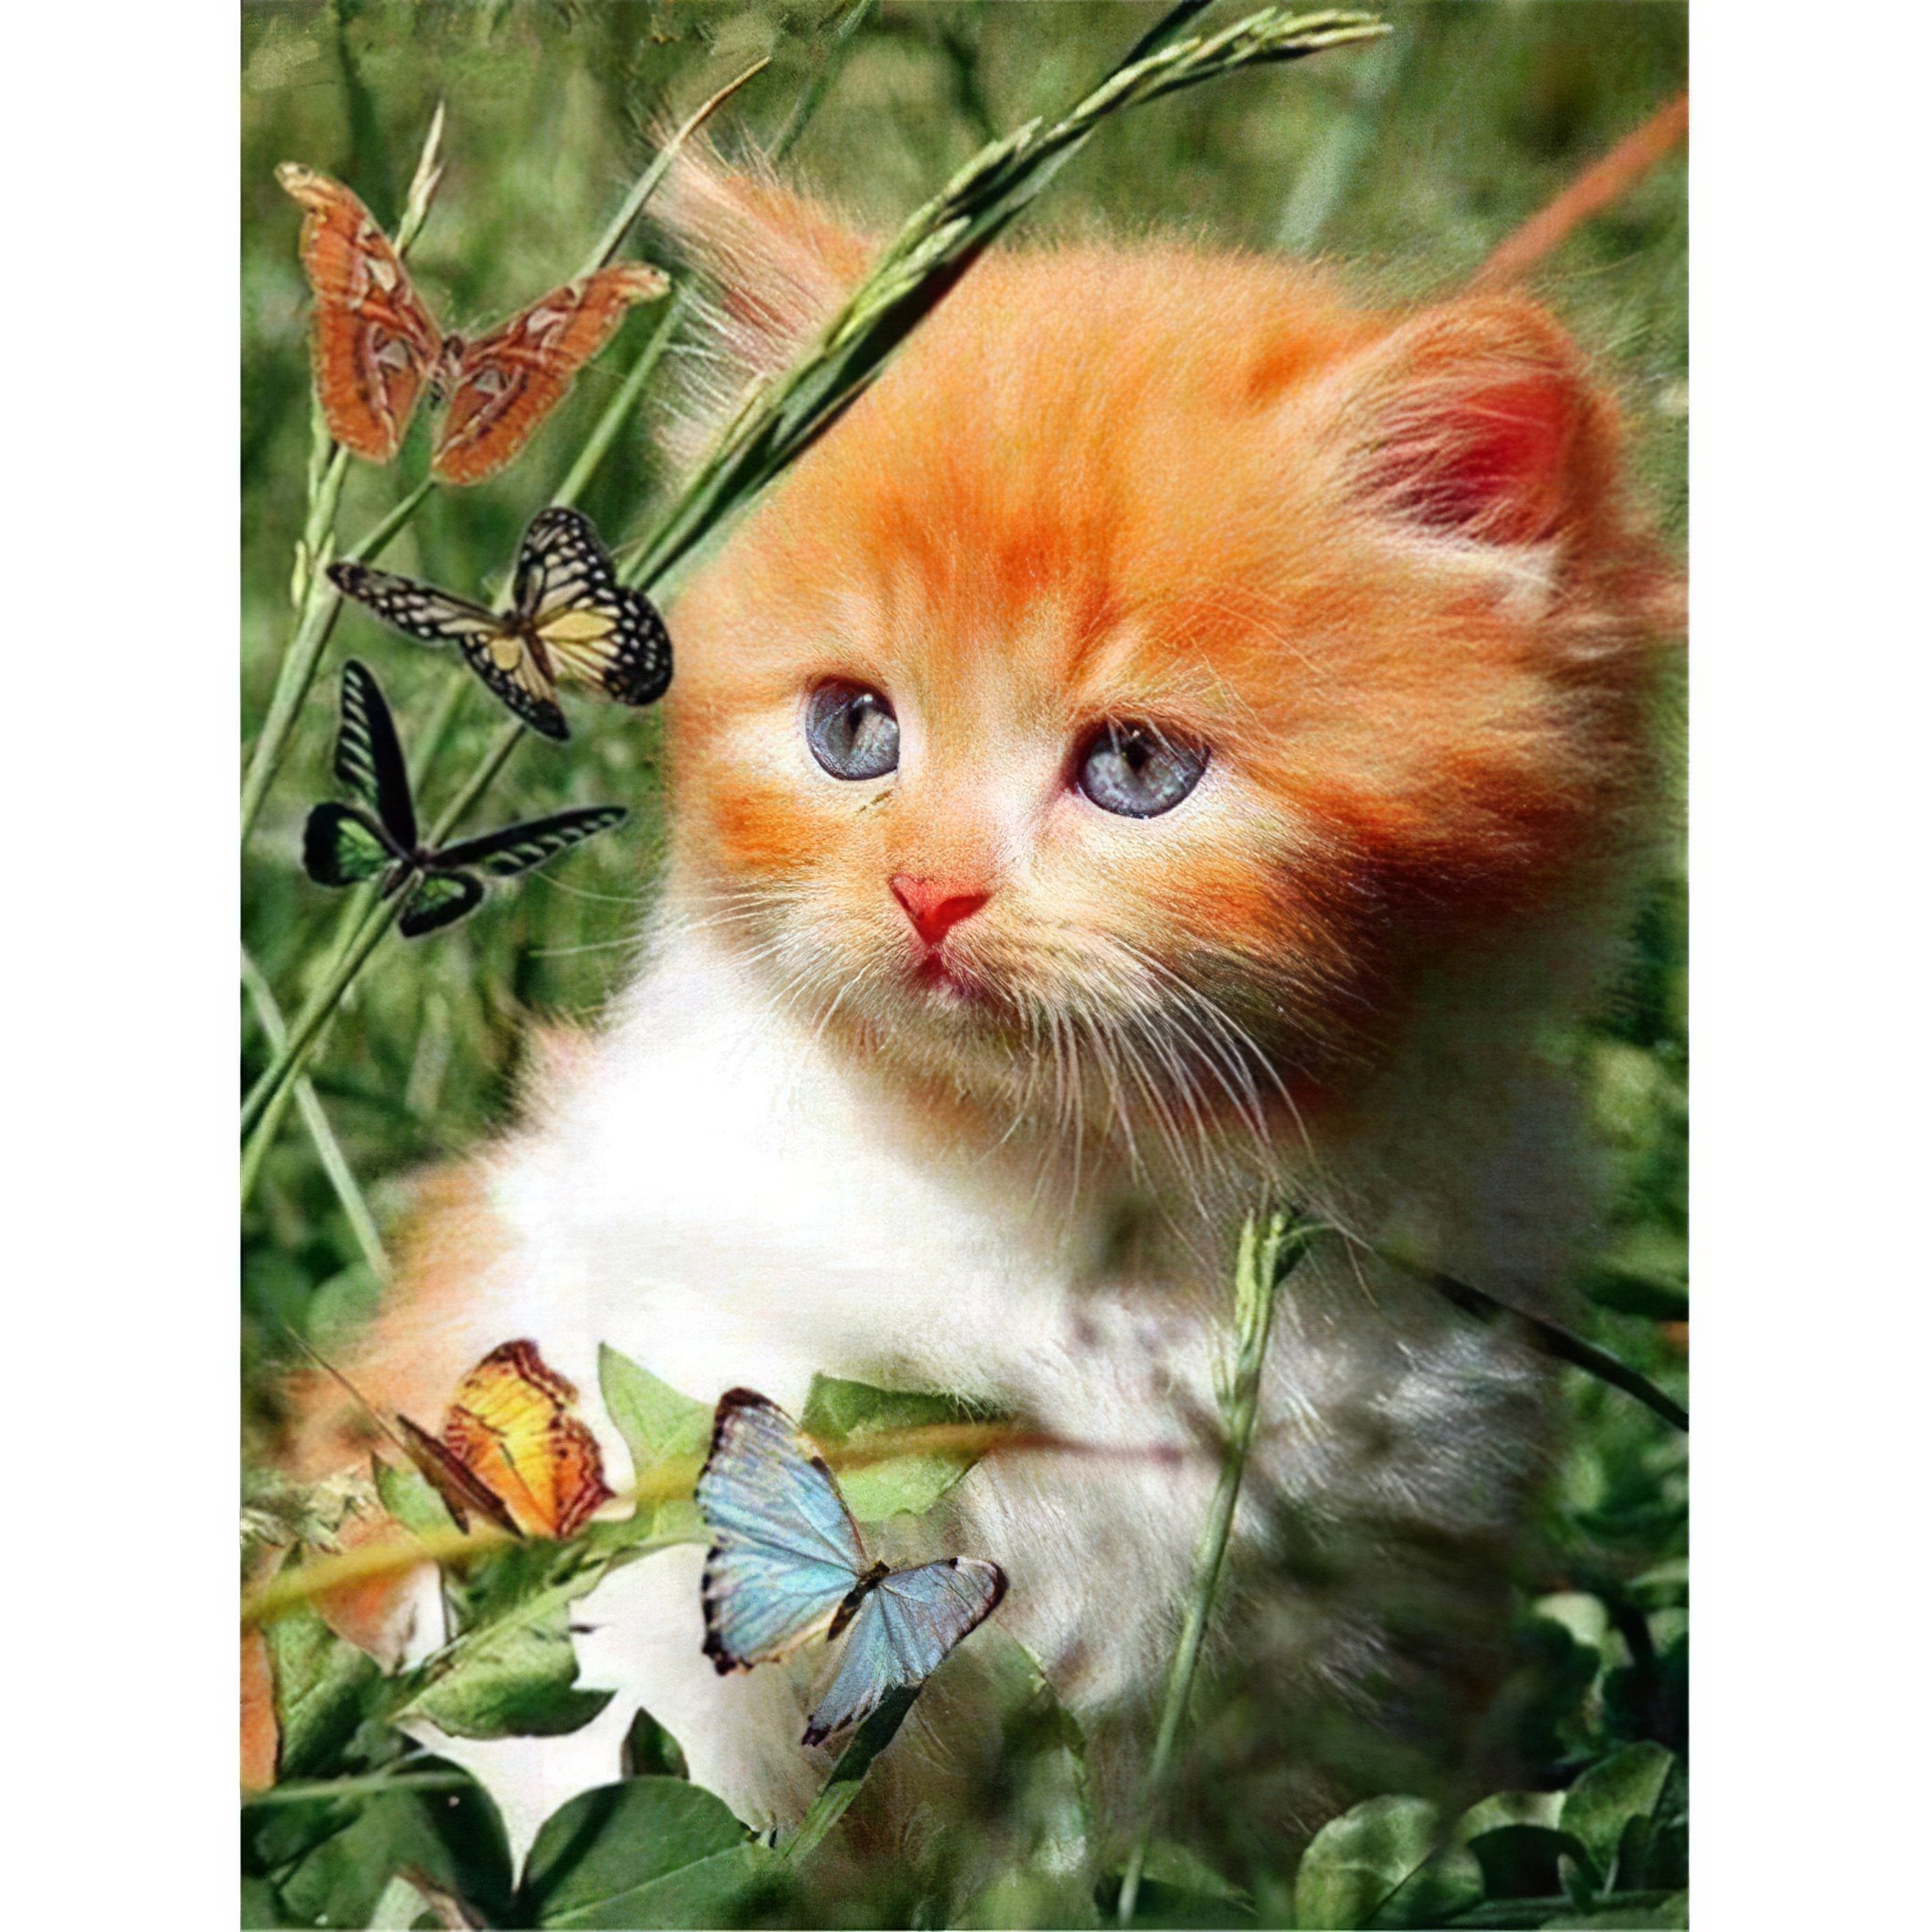 A playful encounter between a cat and a butterfly, capturing moment of nature.Cat And Butterfly - Diamondartlove